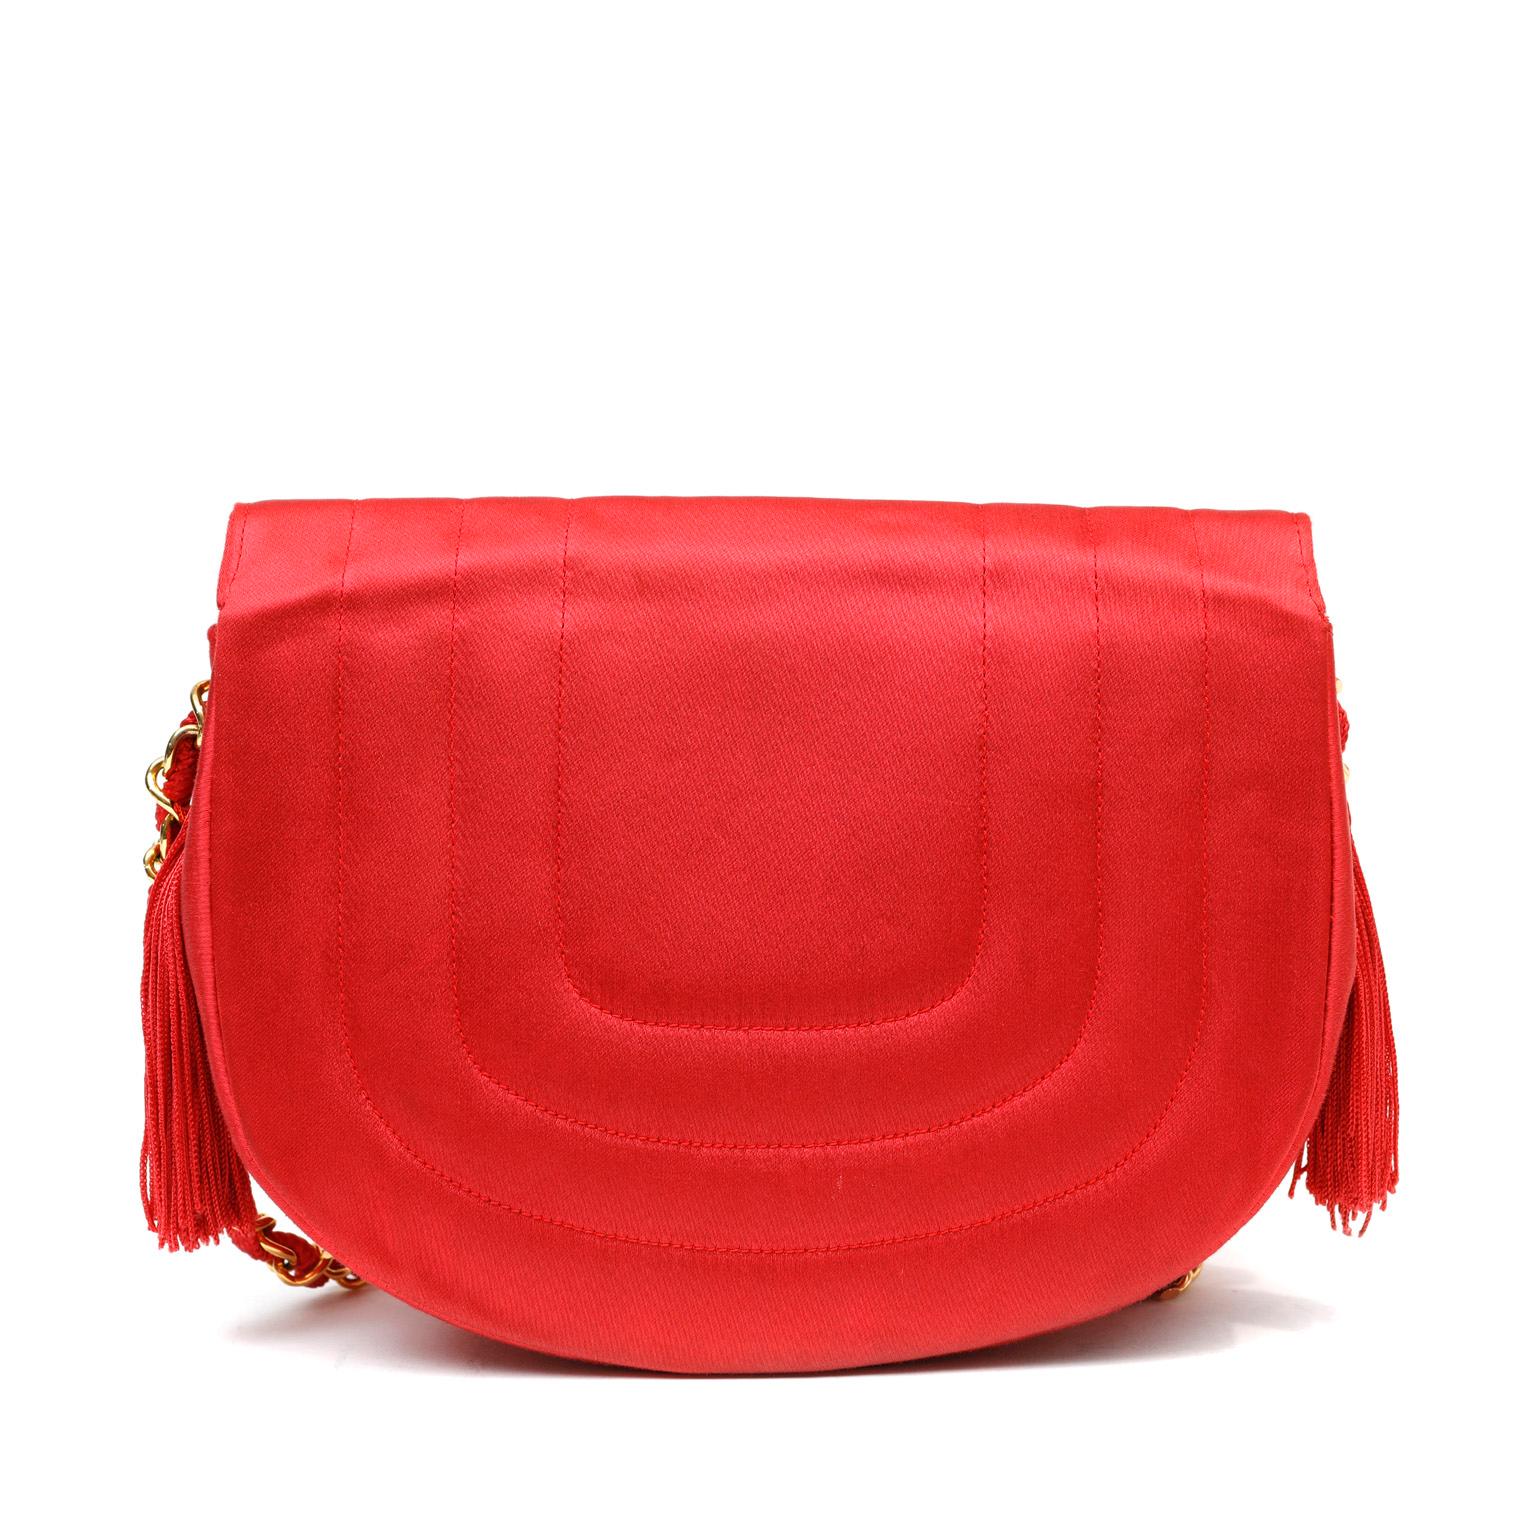 Chanel Red Satin Vintage Evening Bag In Good Condition For Sale In Palm Beach, FL